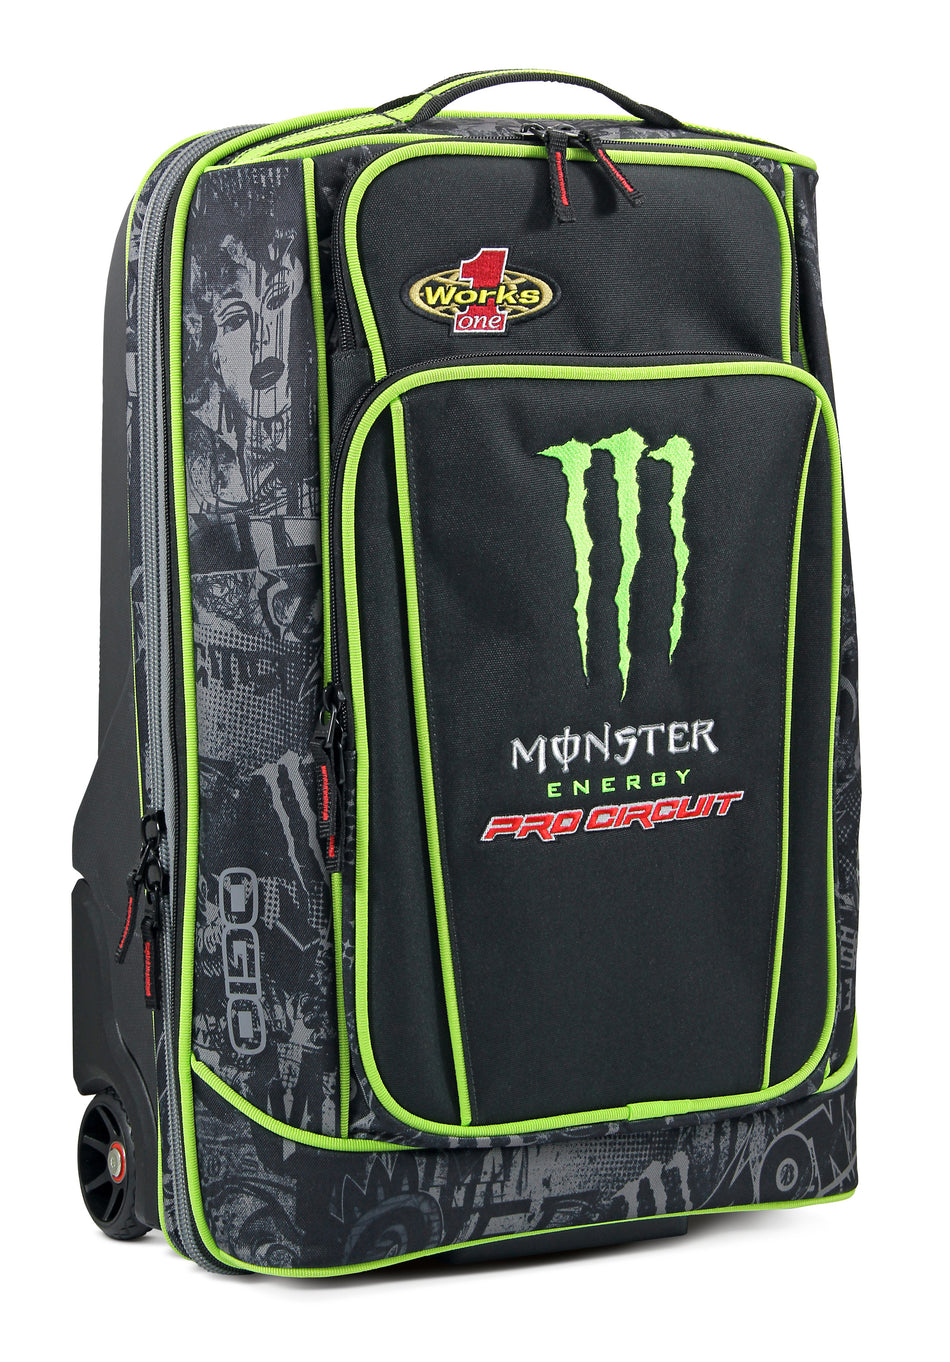 PRO CIRCUIT Monster Shadow Carry On 55169